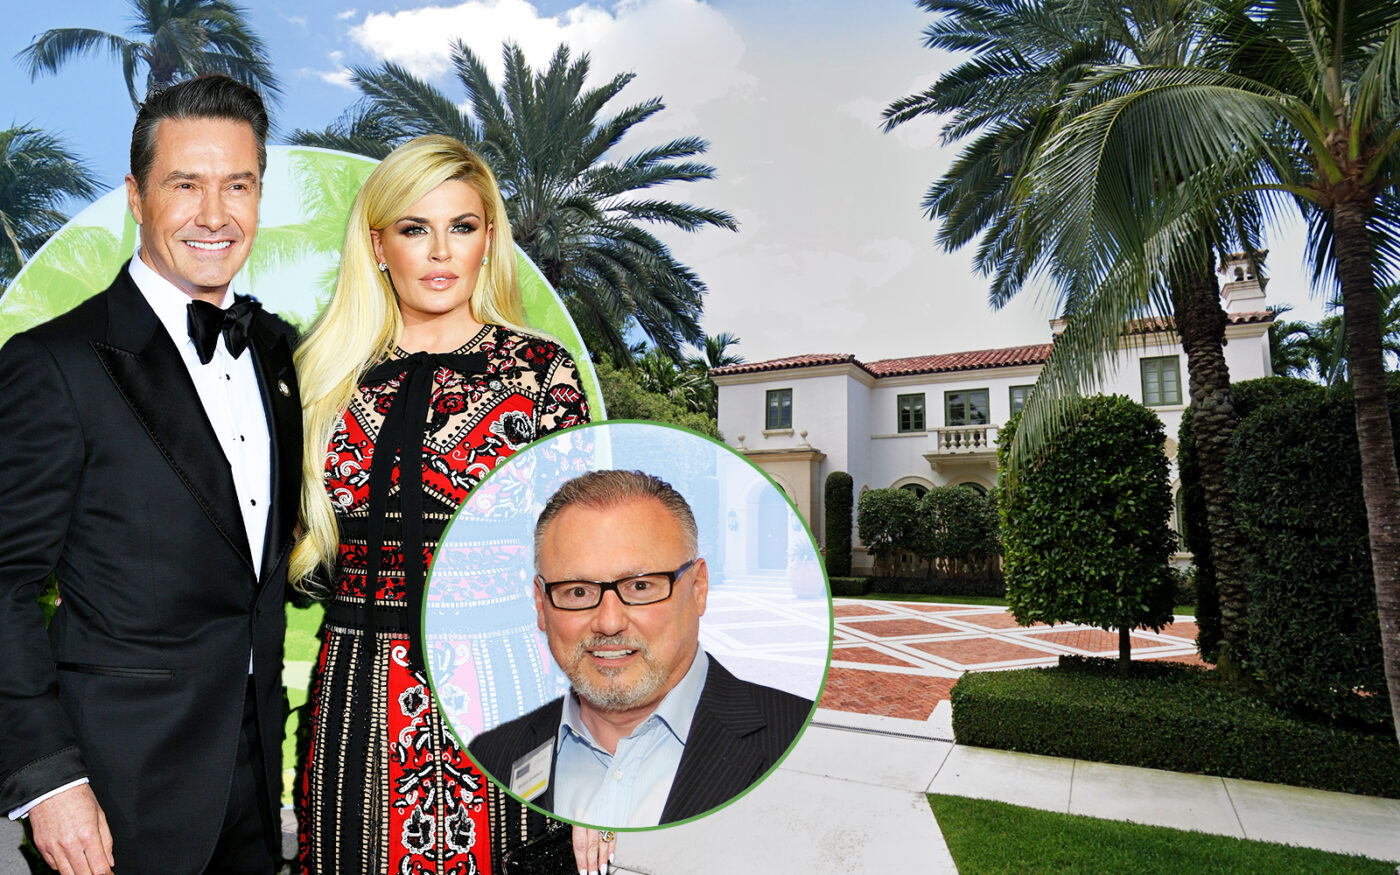 240 Clarke Avenue in PAlm Beach with Chris and Ashlee Wilson Clarke and Michael Cantanucci